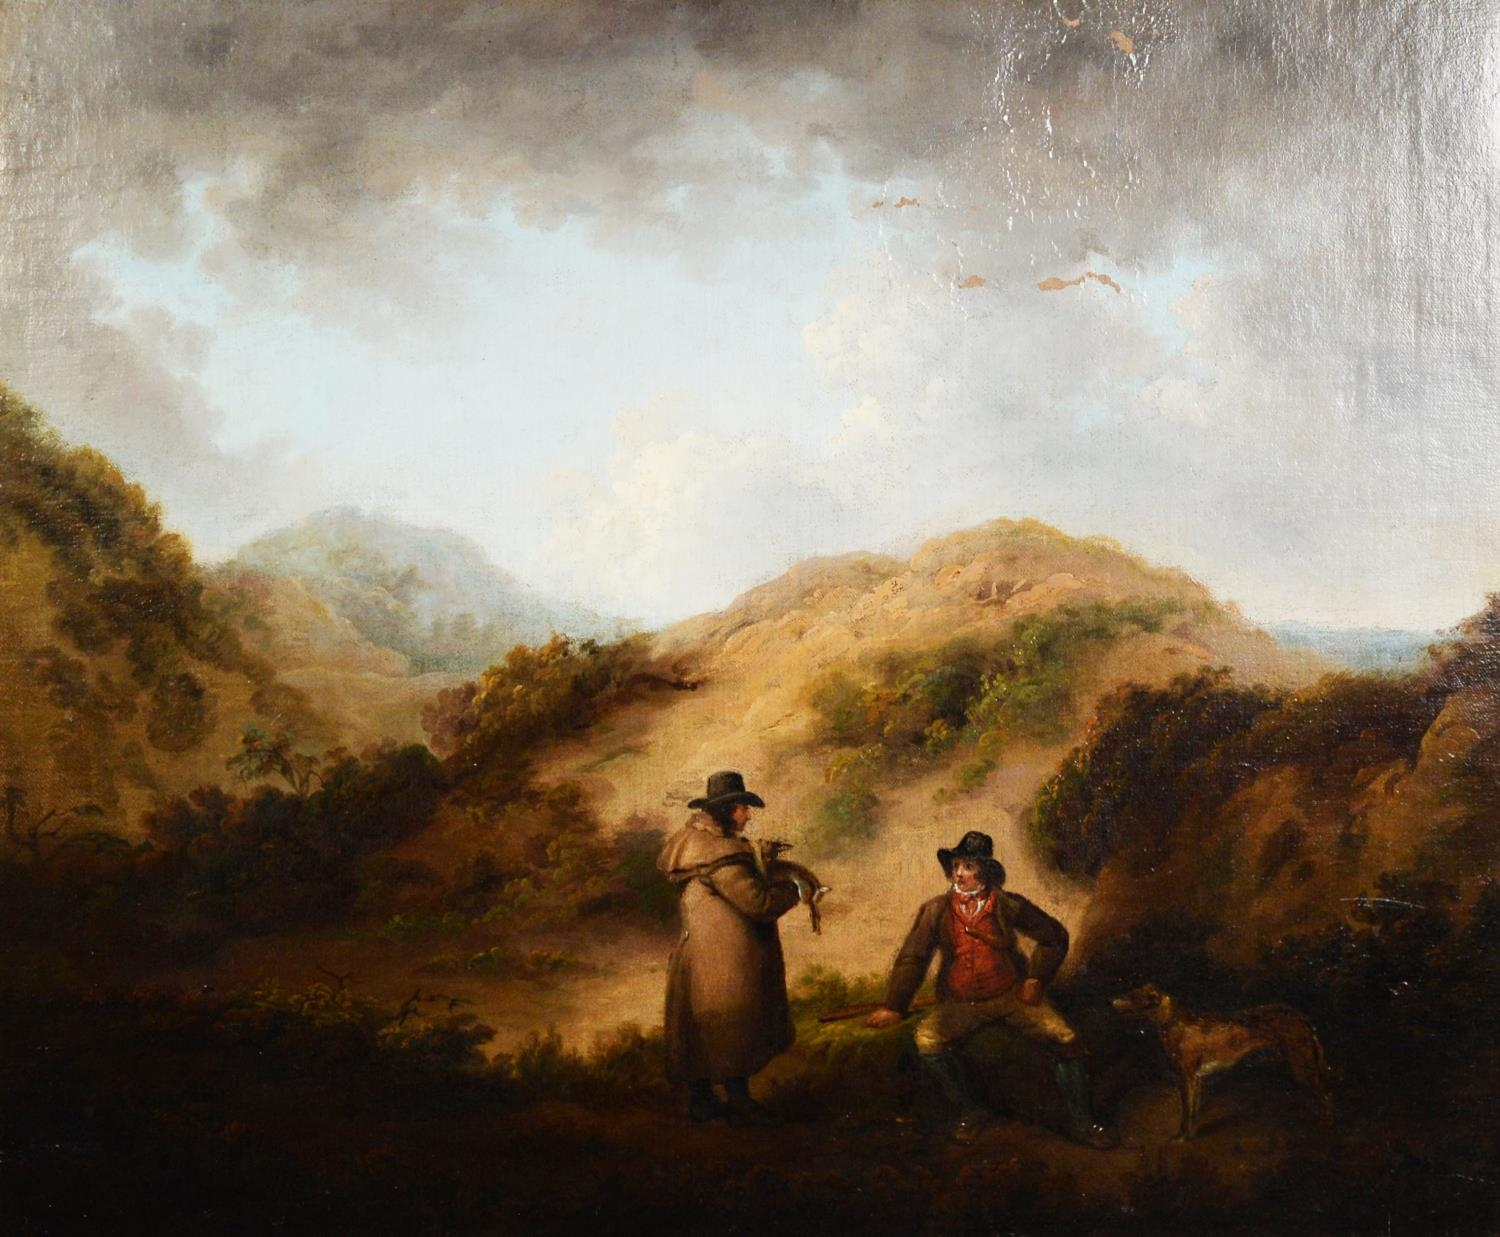 GEORGE MORLAND (1763-1804) OIL PAINTING ON RELINED CANVAS Landscape with two figures - Image 2 of 6